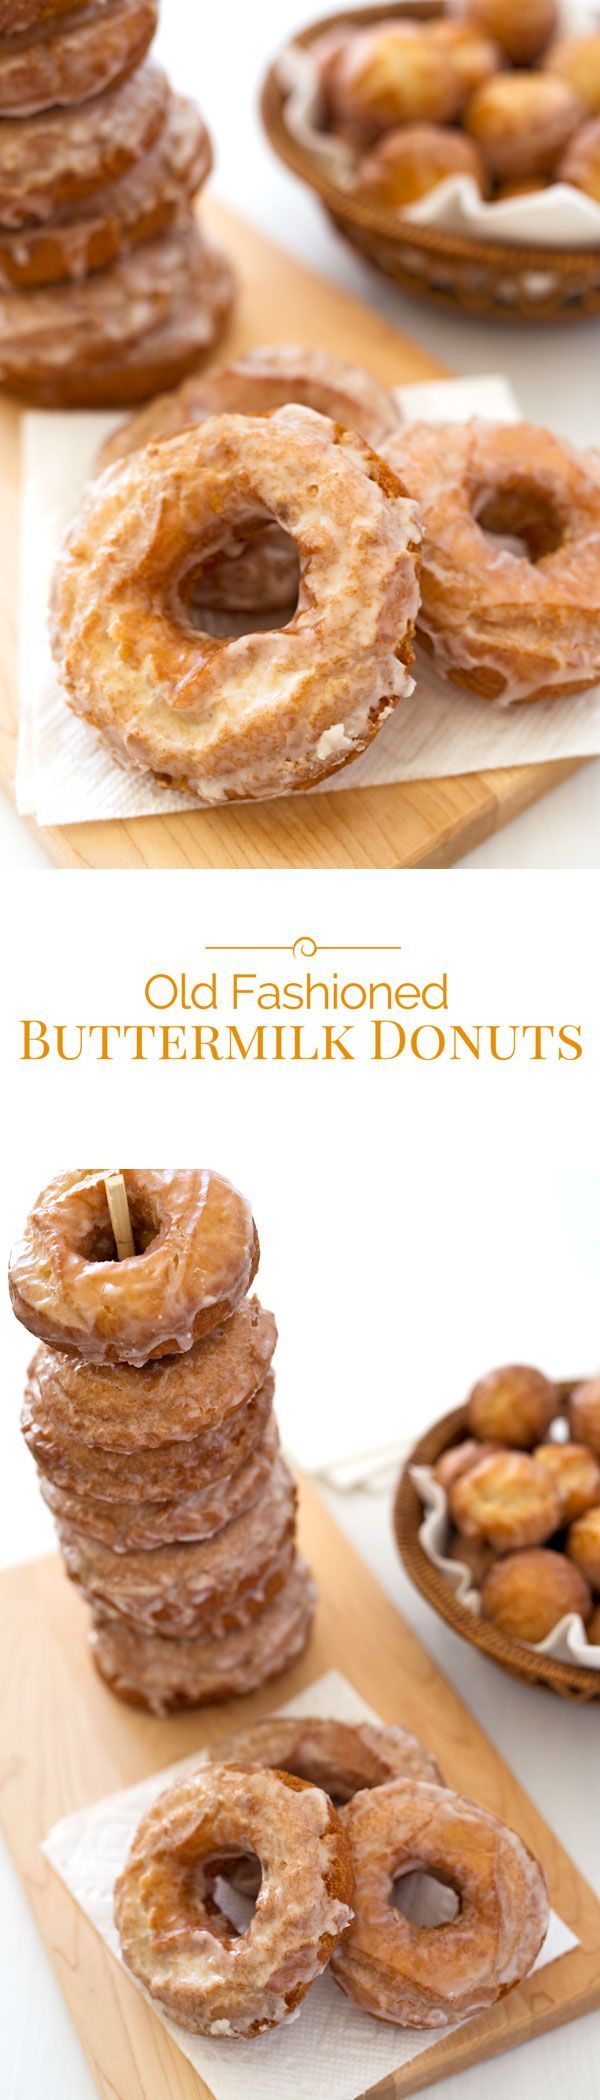 Old Fashioned Buttermilk Donuts are plain cake donuts with a simple glaze, but they’re scored so that when they’re fried they get